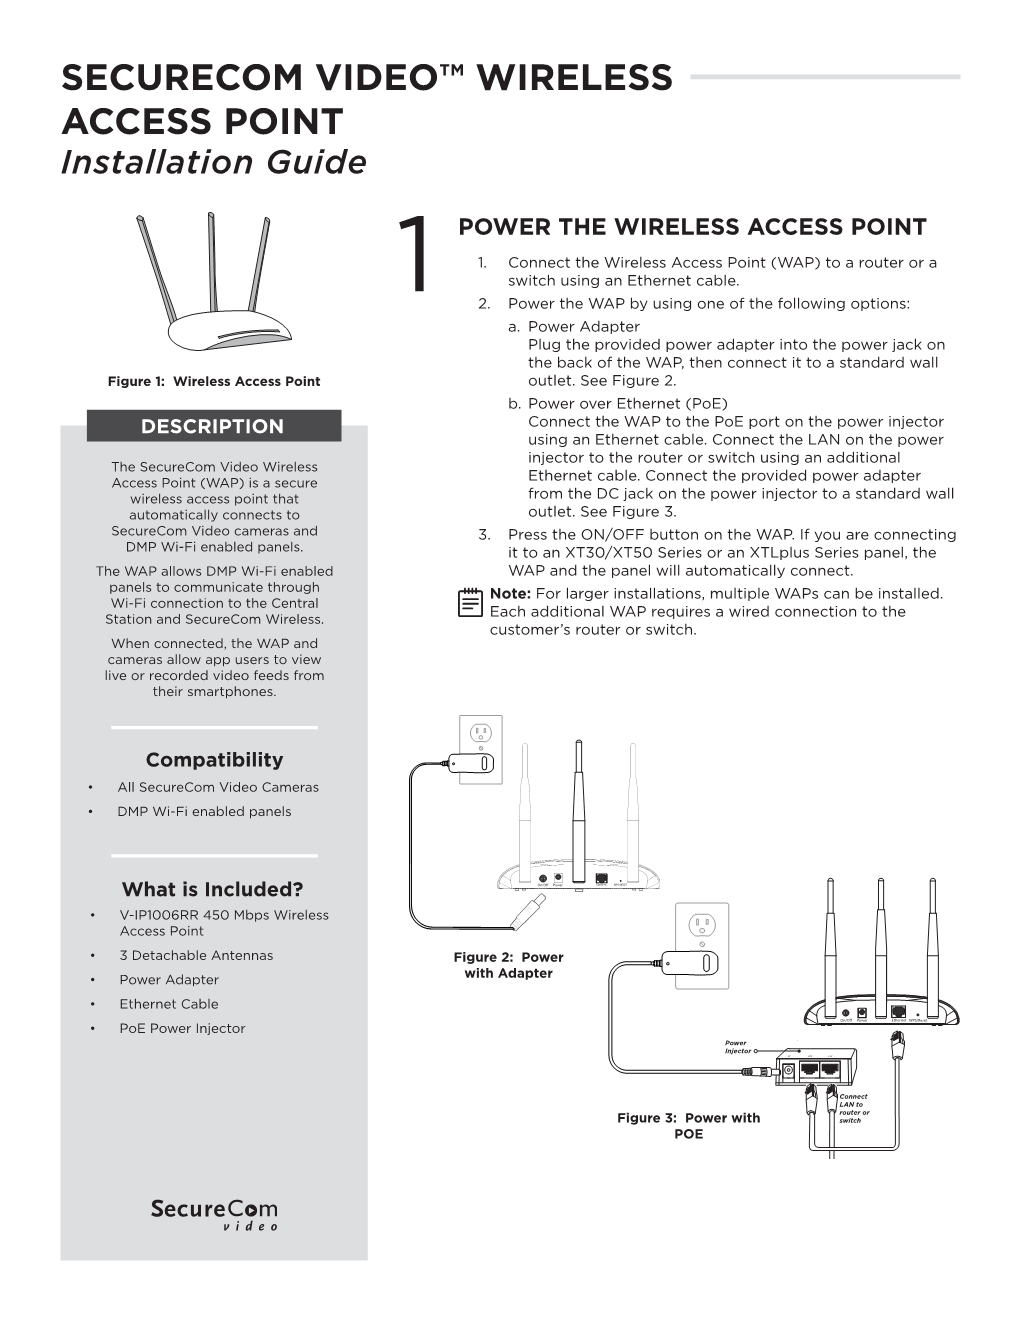 SECURECOM VIDEO™ WIRELESS ACCESS POINT Installation Guide